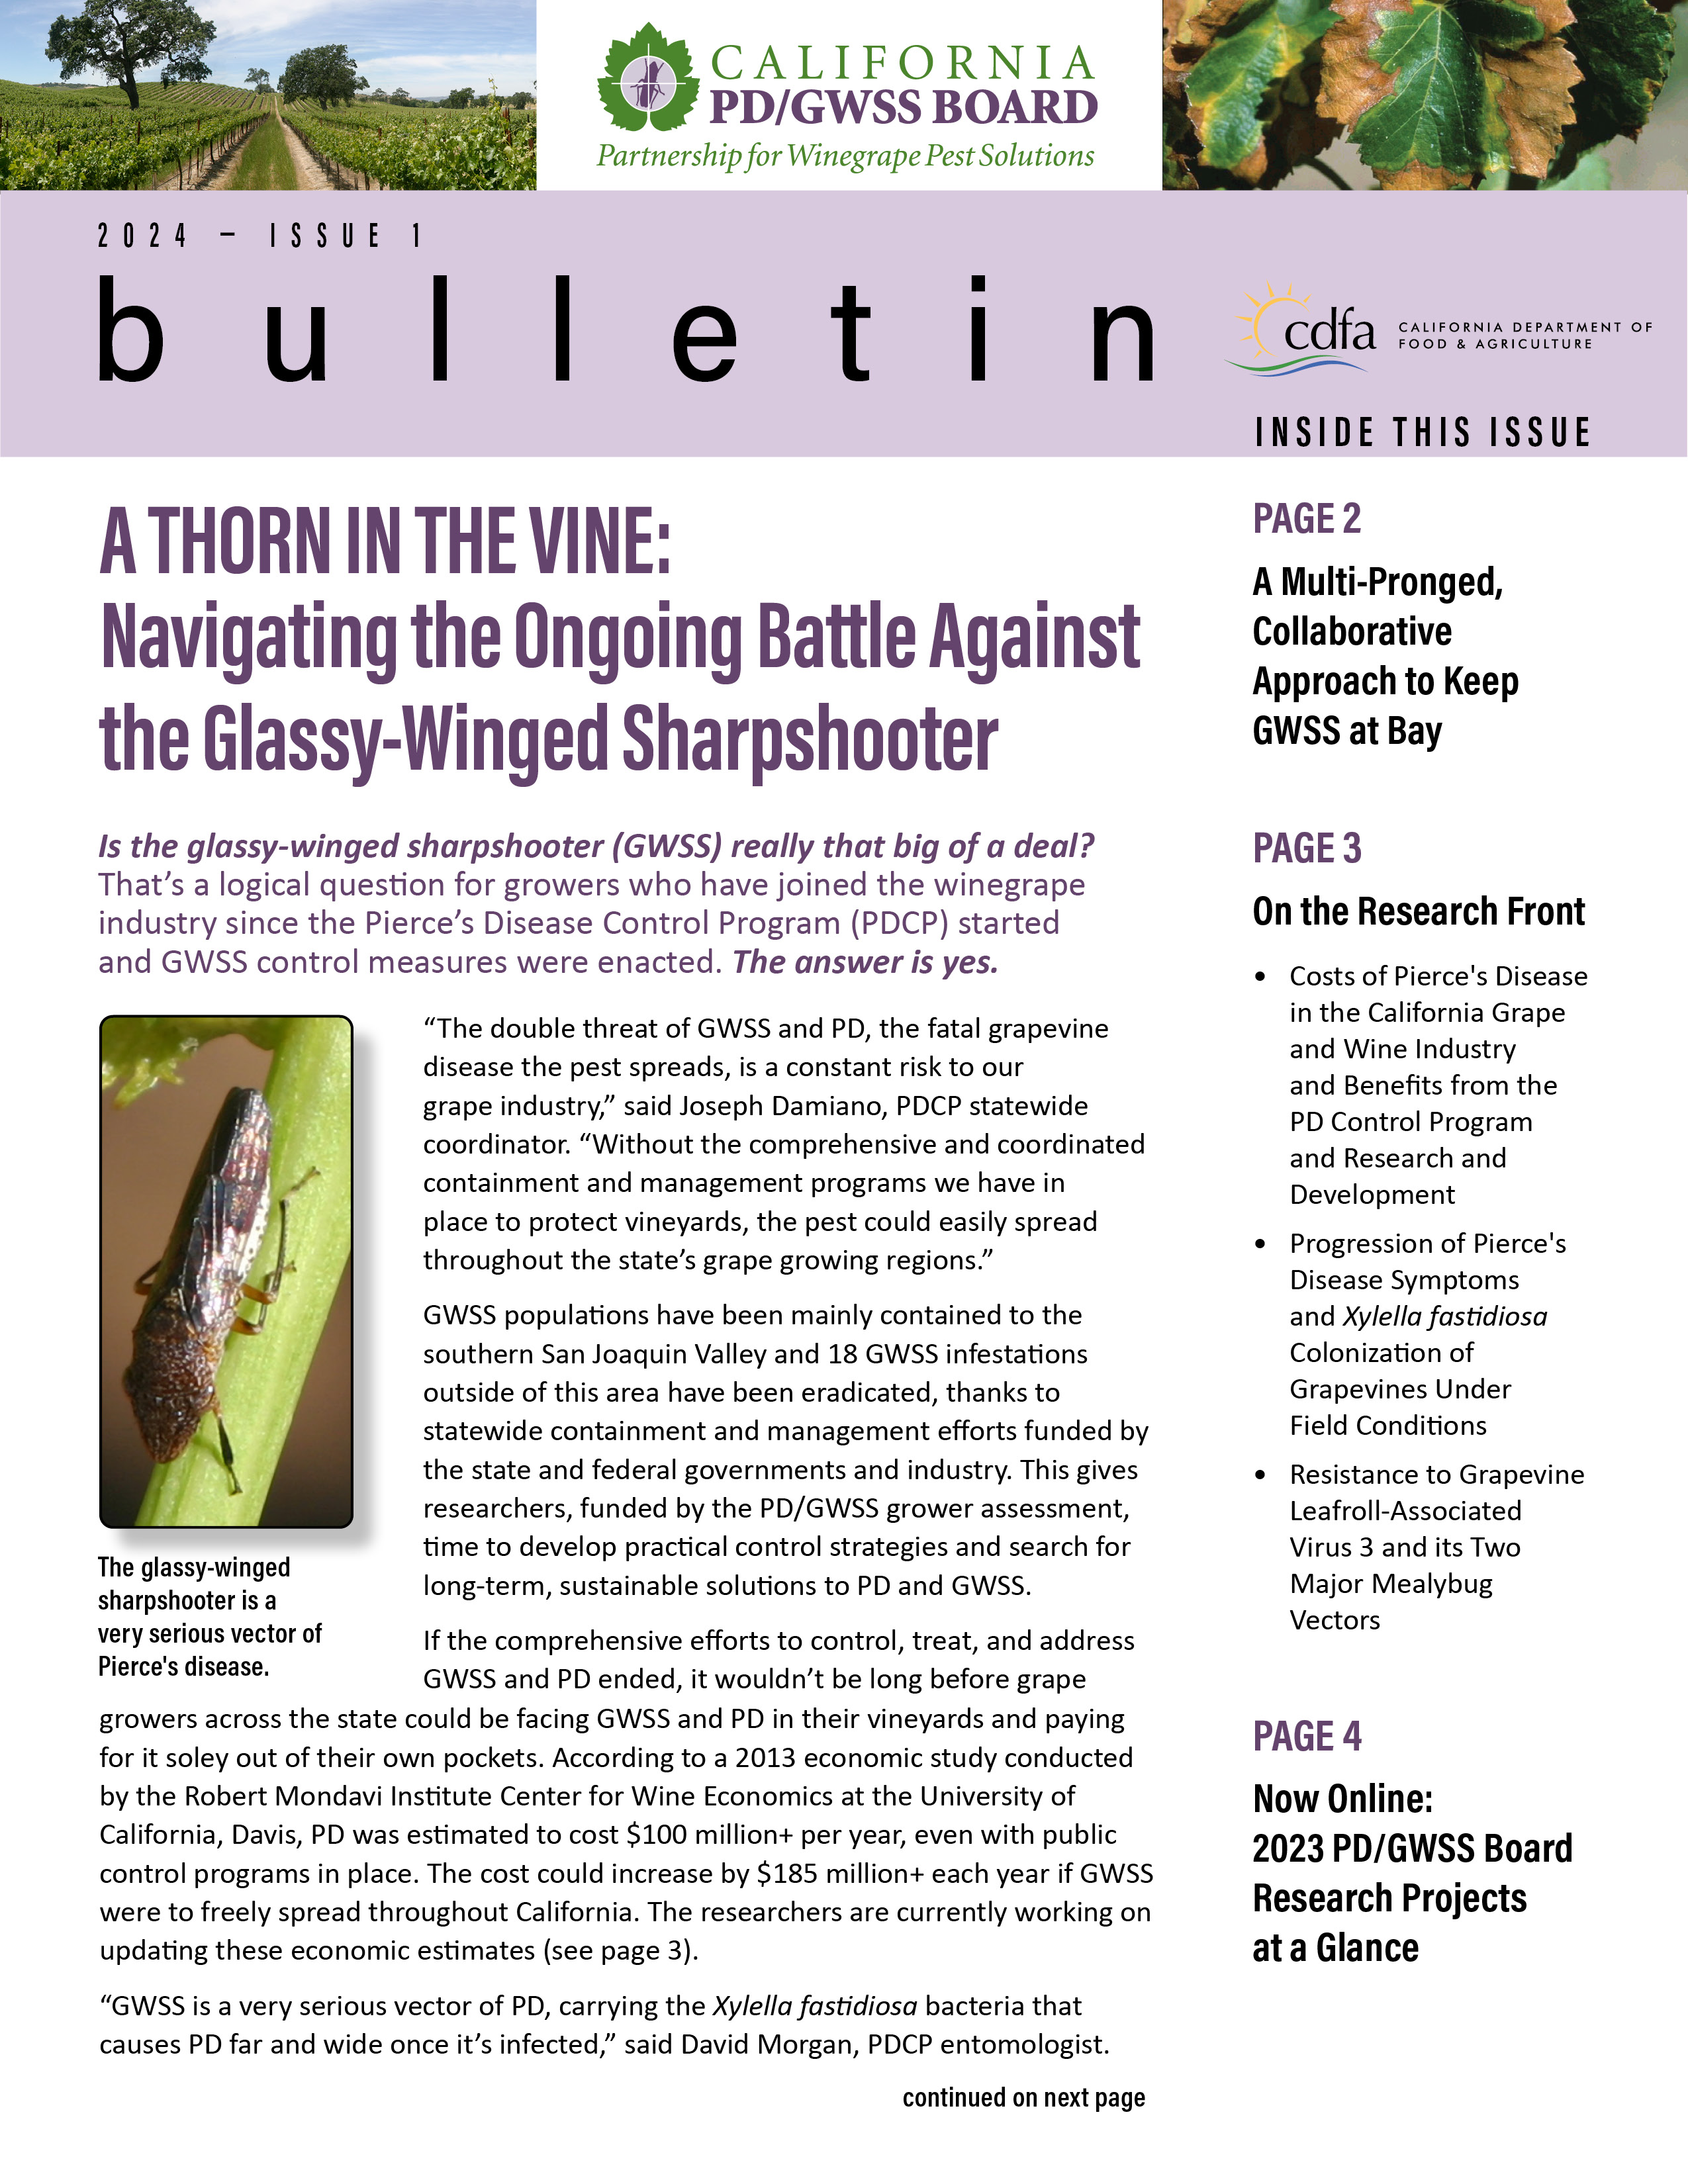 Issue 1 cover of Newsletter